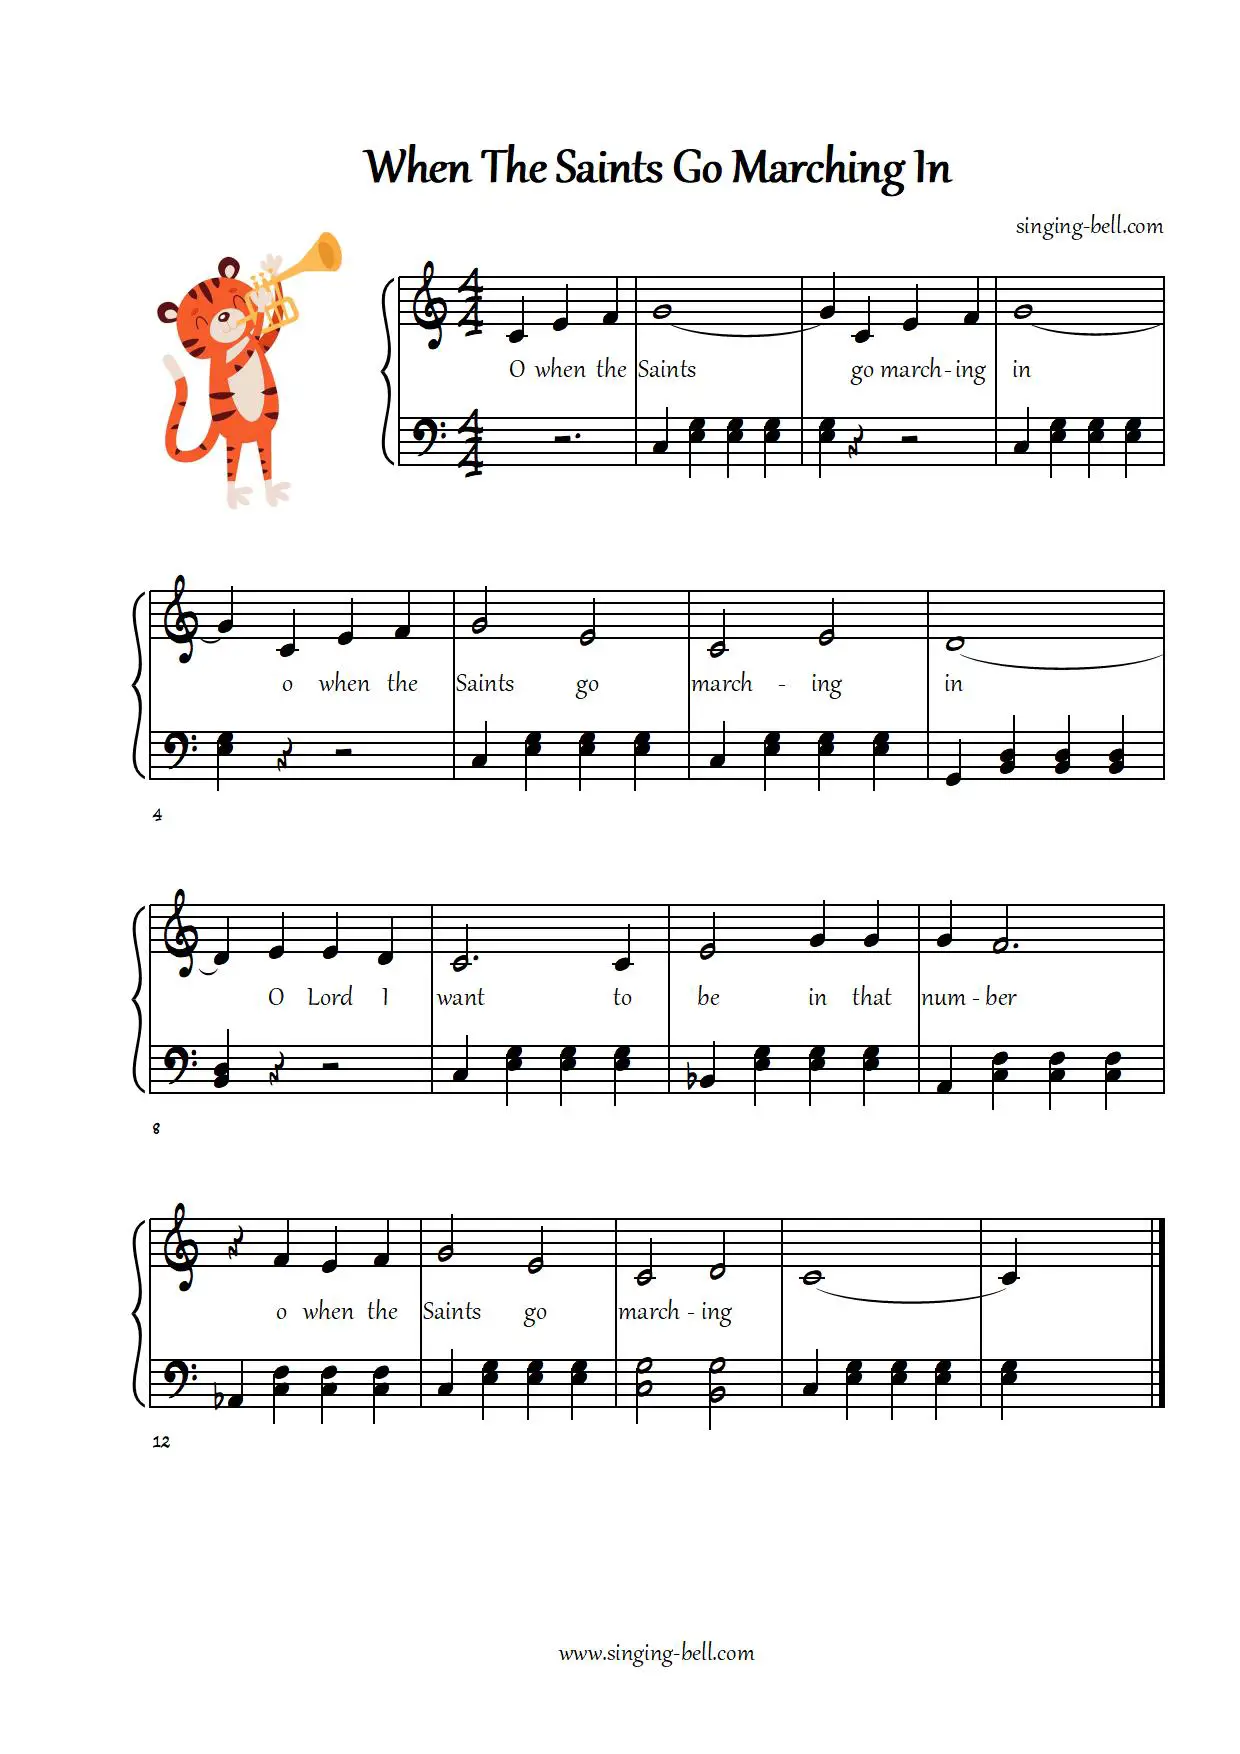 When The Saints Go Marching In easy piano sheet music notes chords beginners pdf